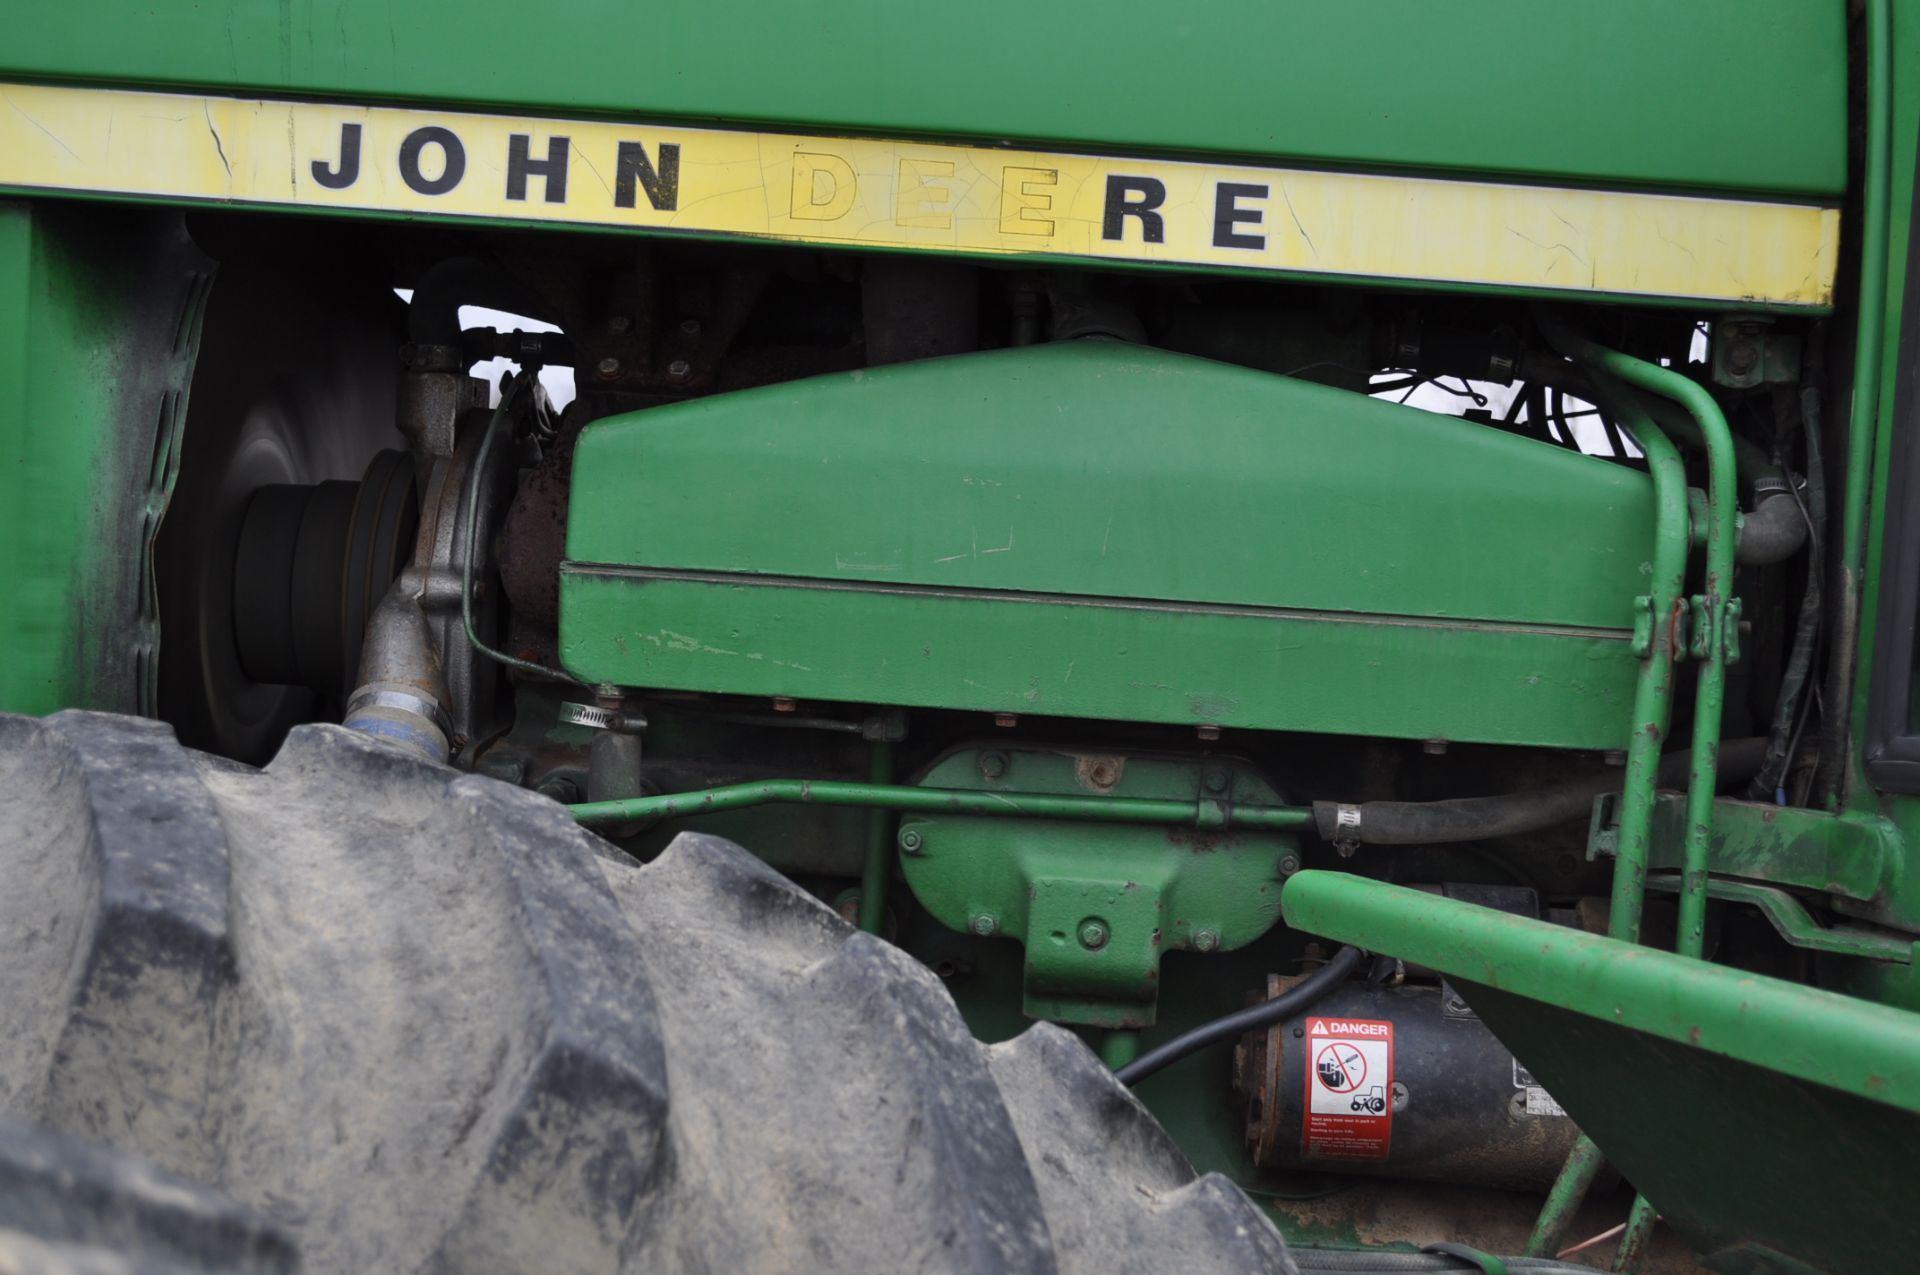 John Deere 8430 tractor, 4WD, diesel, 20.8-34 duals, CHA, Quad range, 3 hyd remotes, 1000 pto, 3 pt, - Image 10 of 19